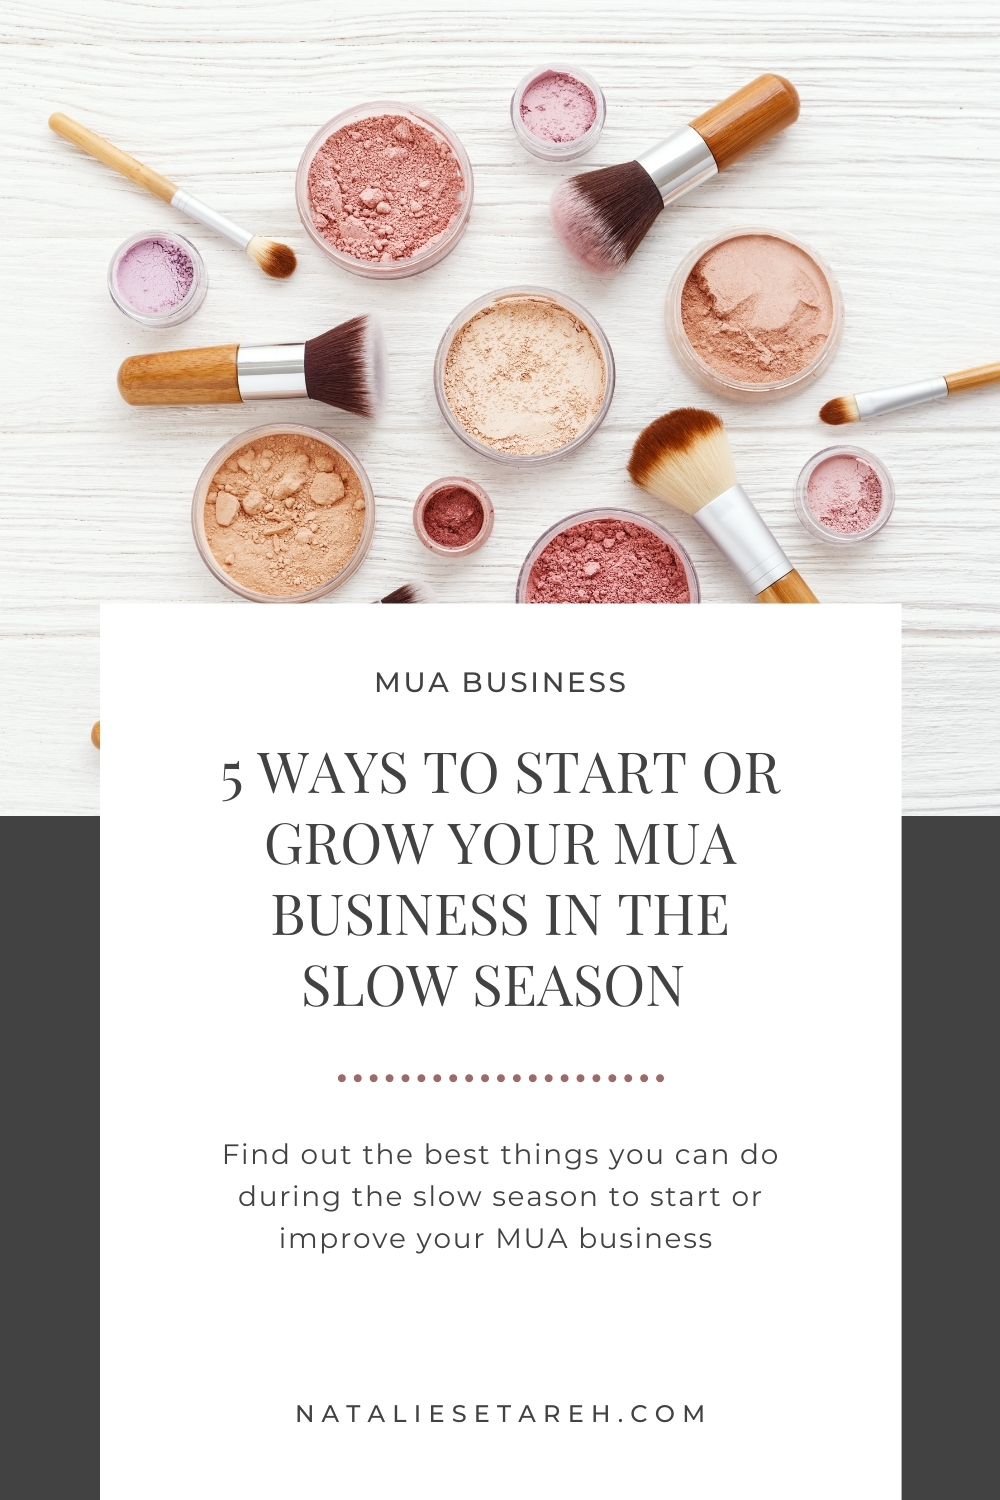 5 ways to start or grow your makeup business during slow season